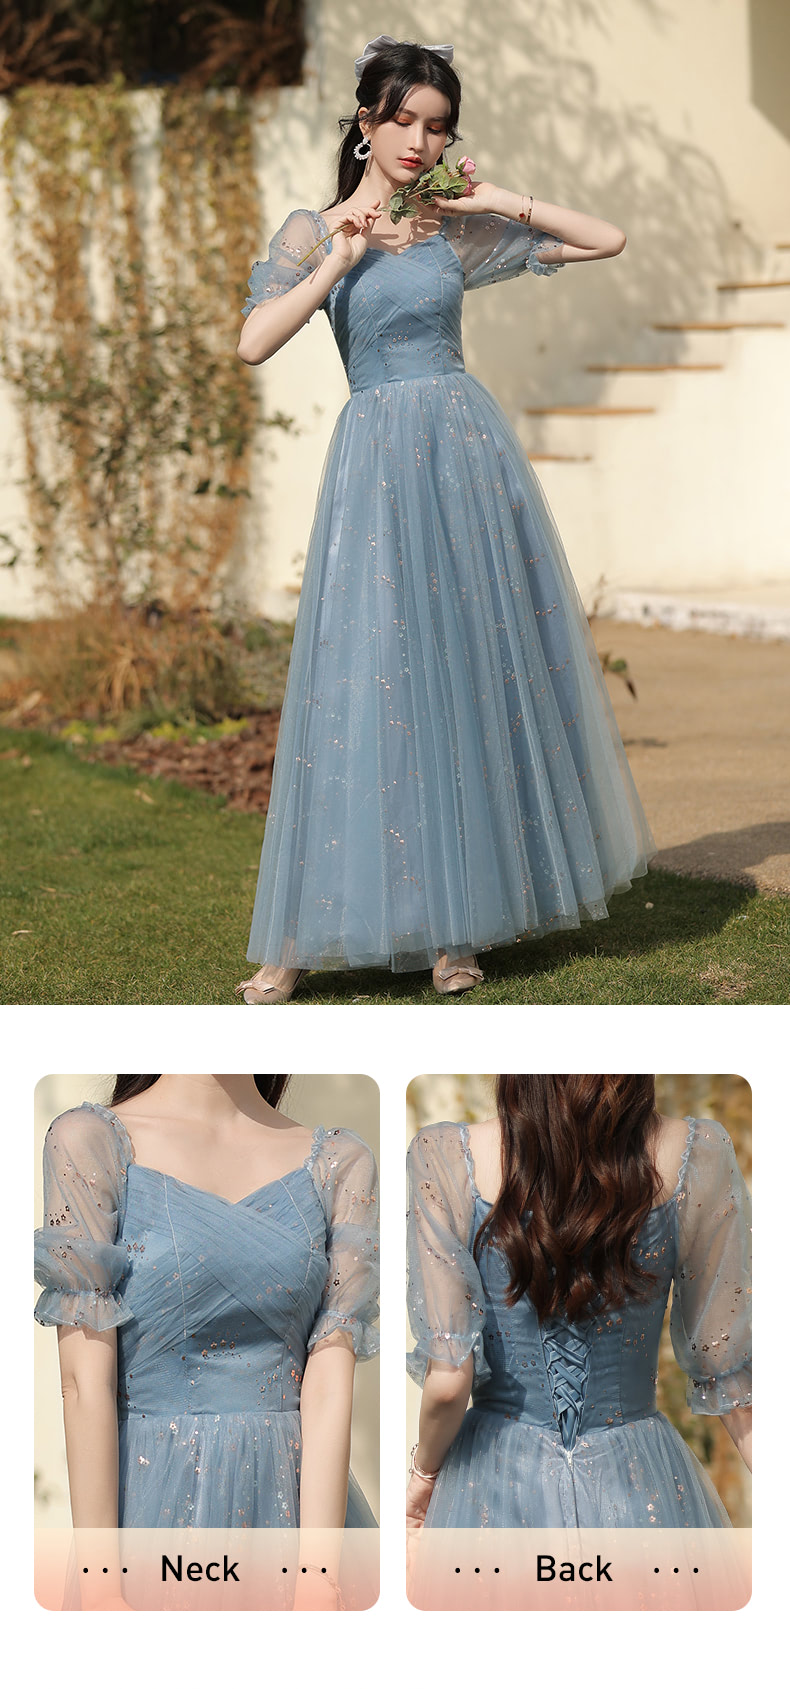 Blue-Bridesmaid-Dress-Wedding-Female-Guest-Gown-with-4-Styles18.jpg